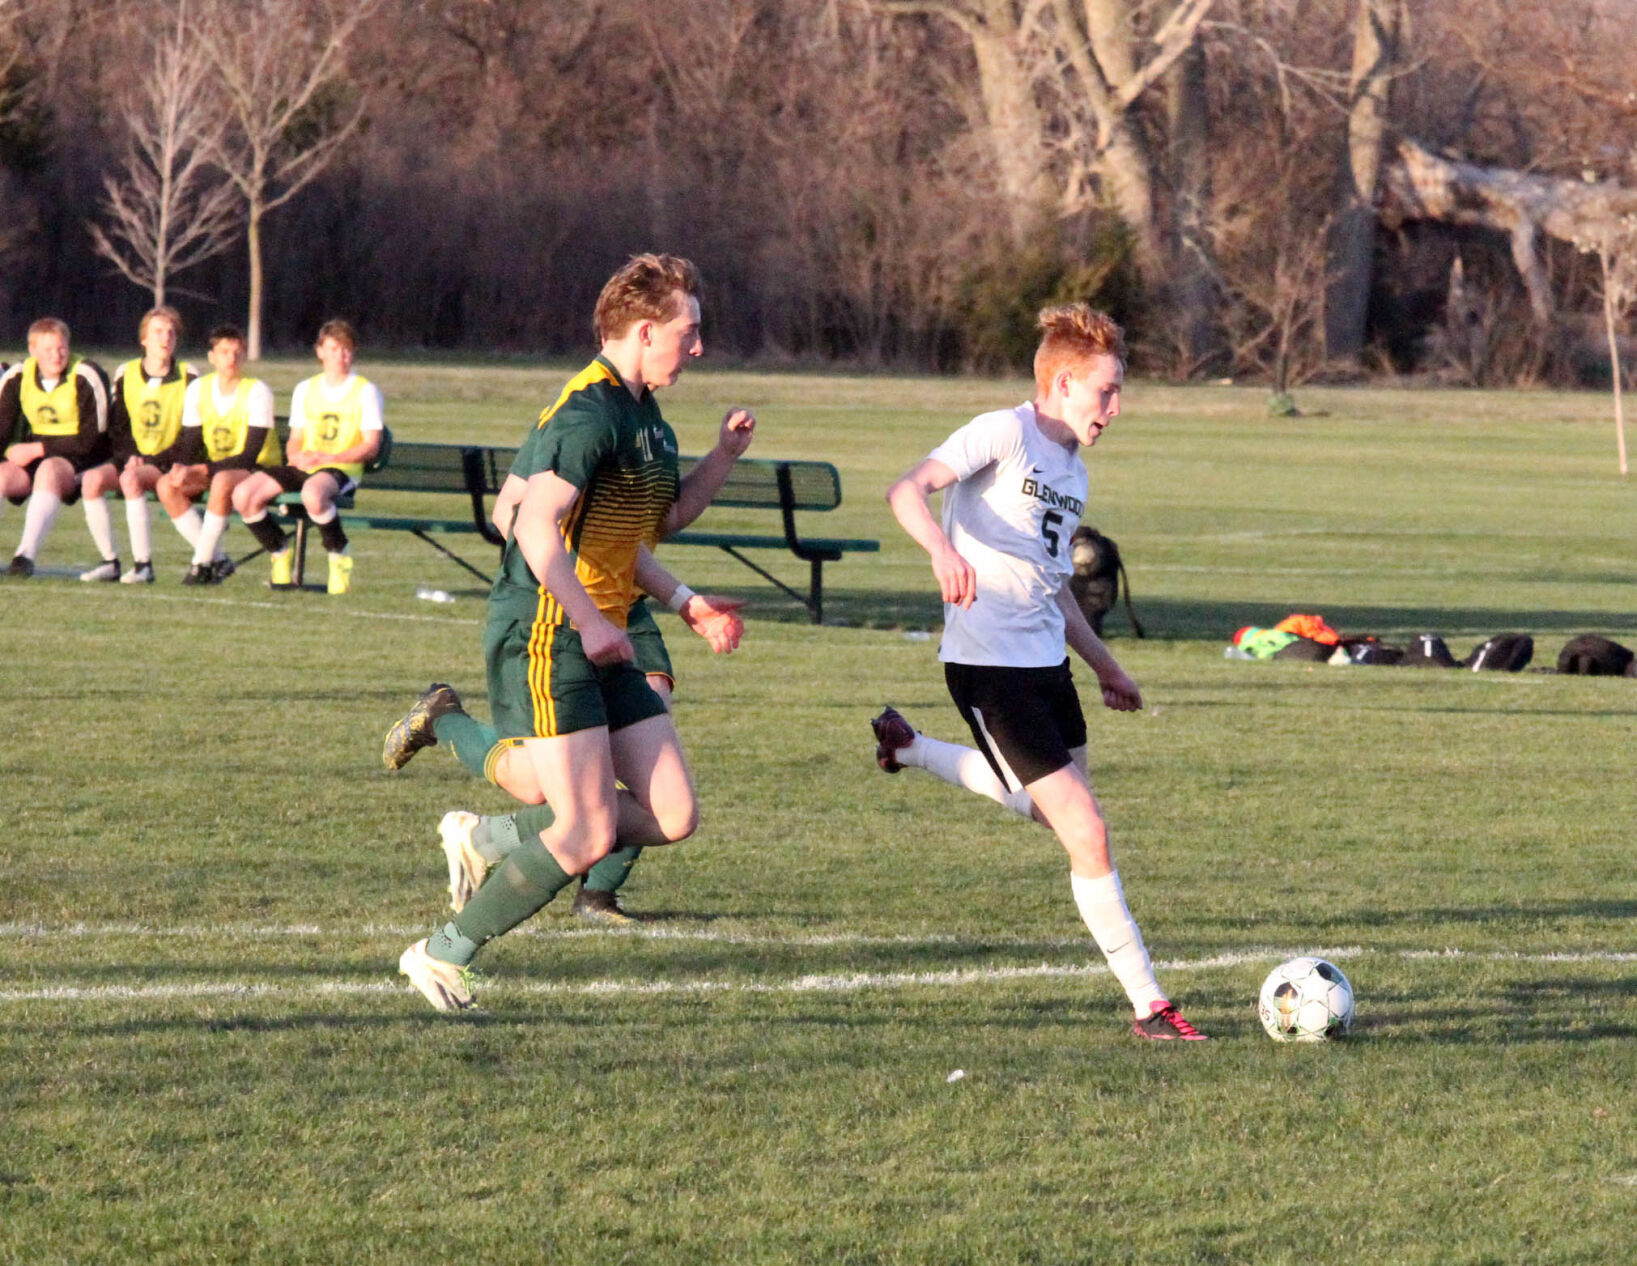 Cameron King’s Hat Trick Powers Glenwood Rams to Victory Over St. Albert